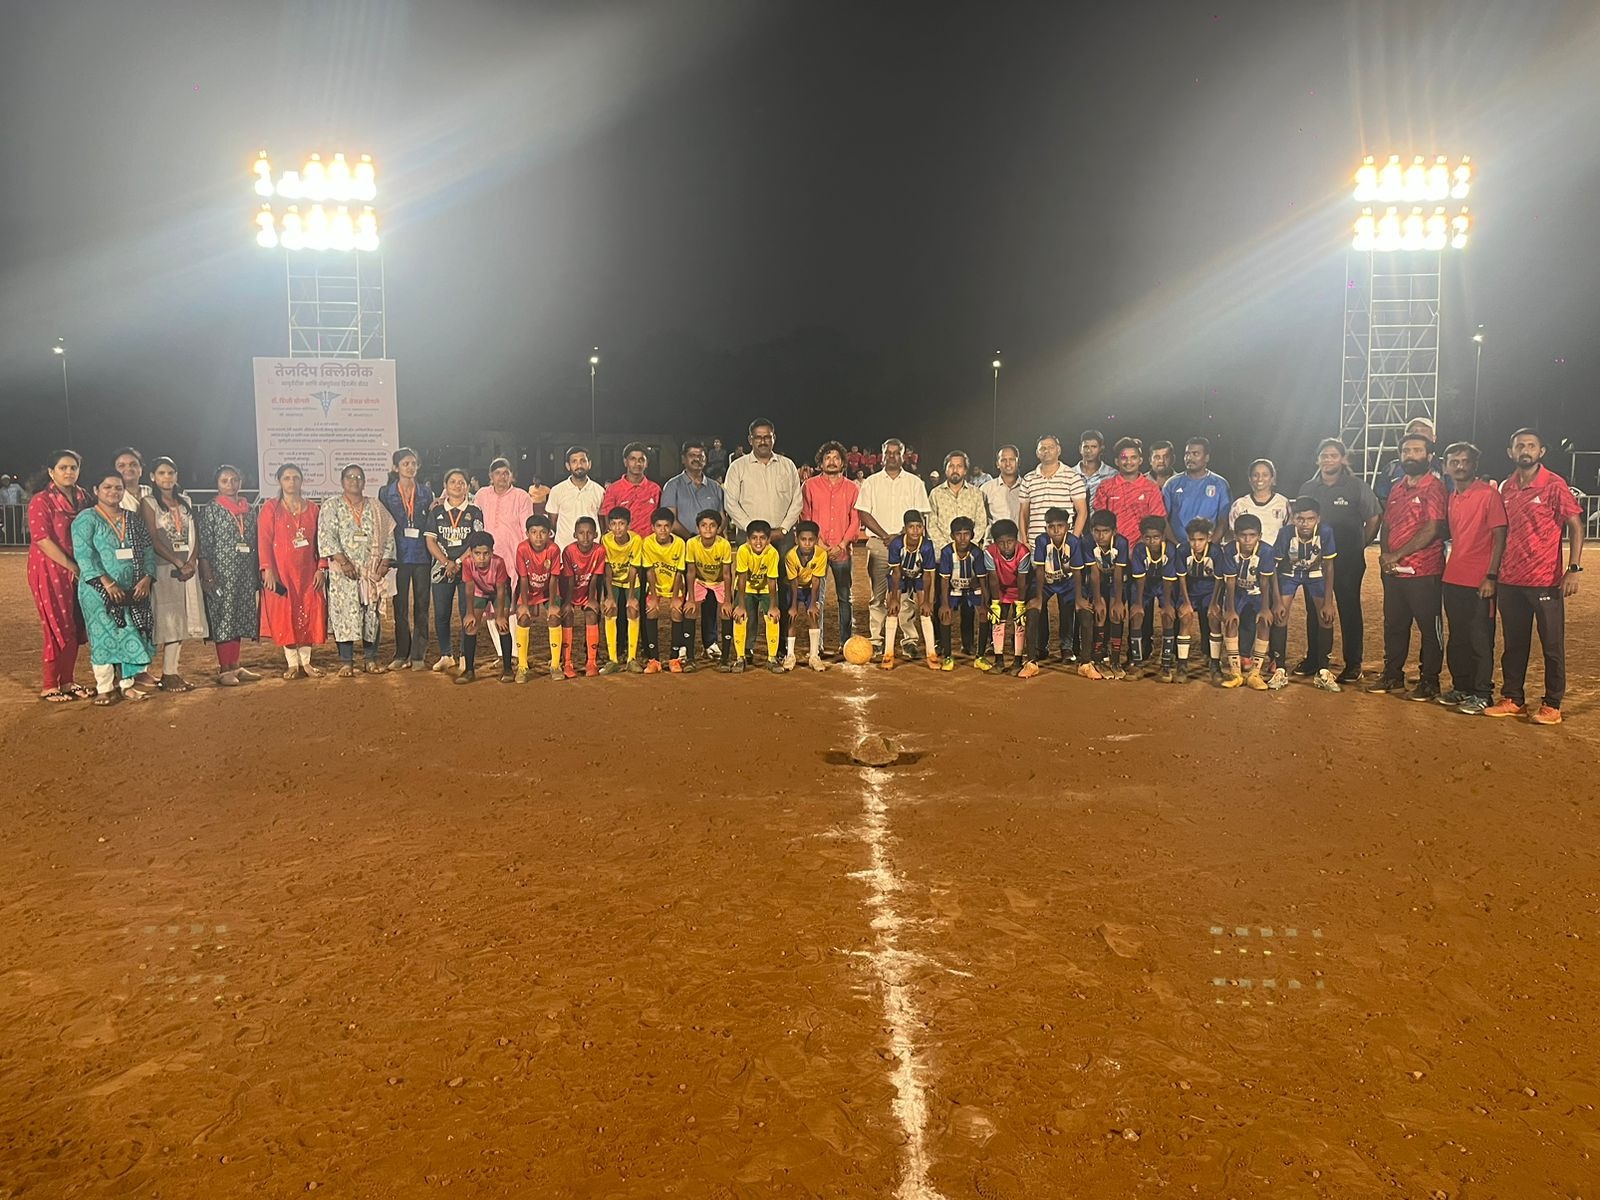 35 teams participated in S3 Soccer Academy Football Tournament